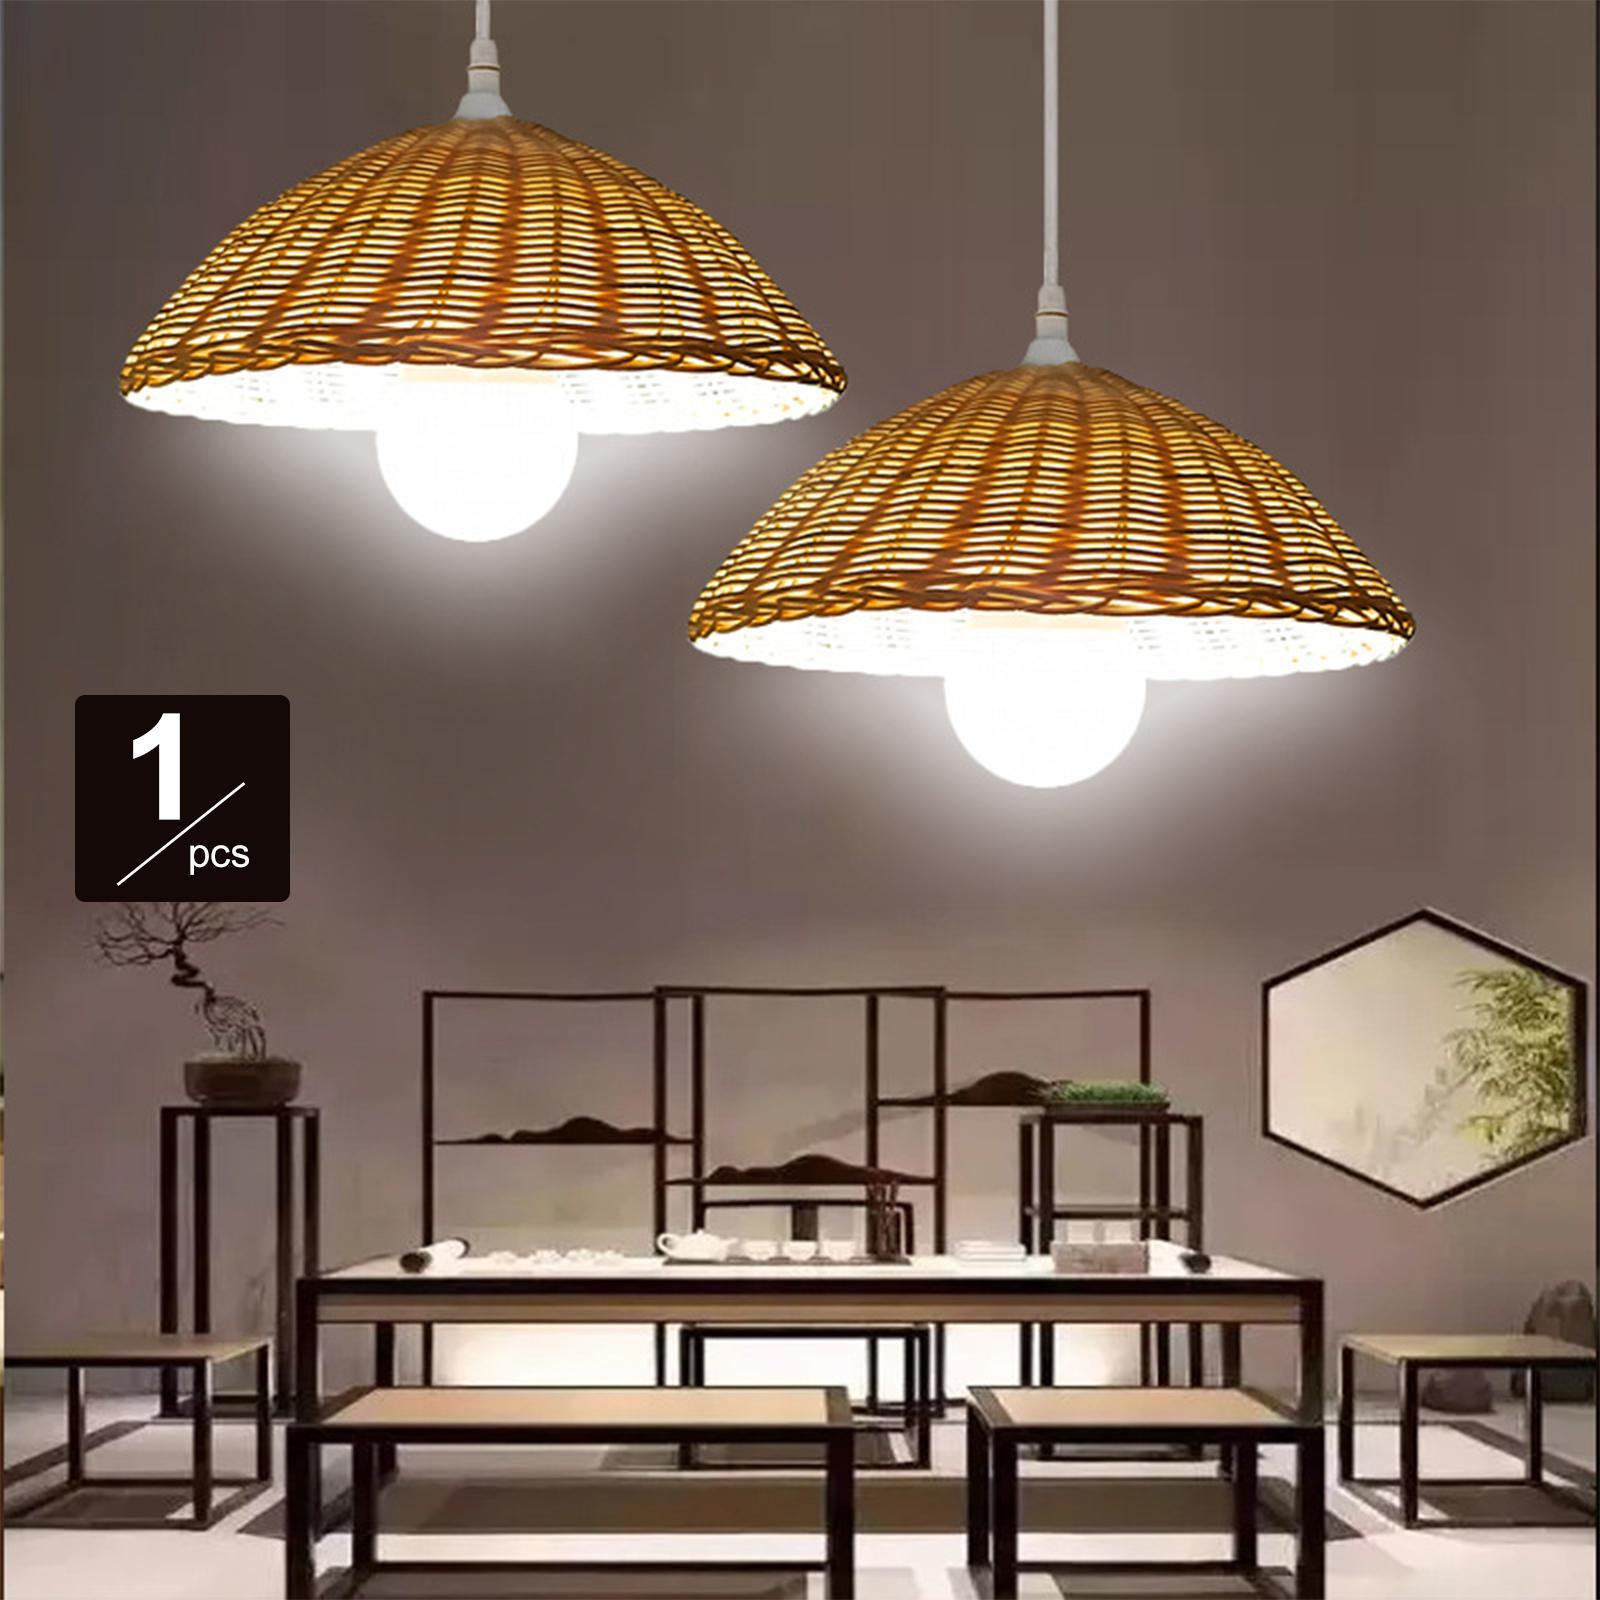 Bamboo Lamp Shade Decoration Light Bulb Cover Bulb Guard for Dining Room